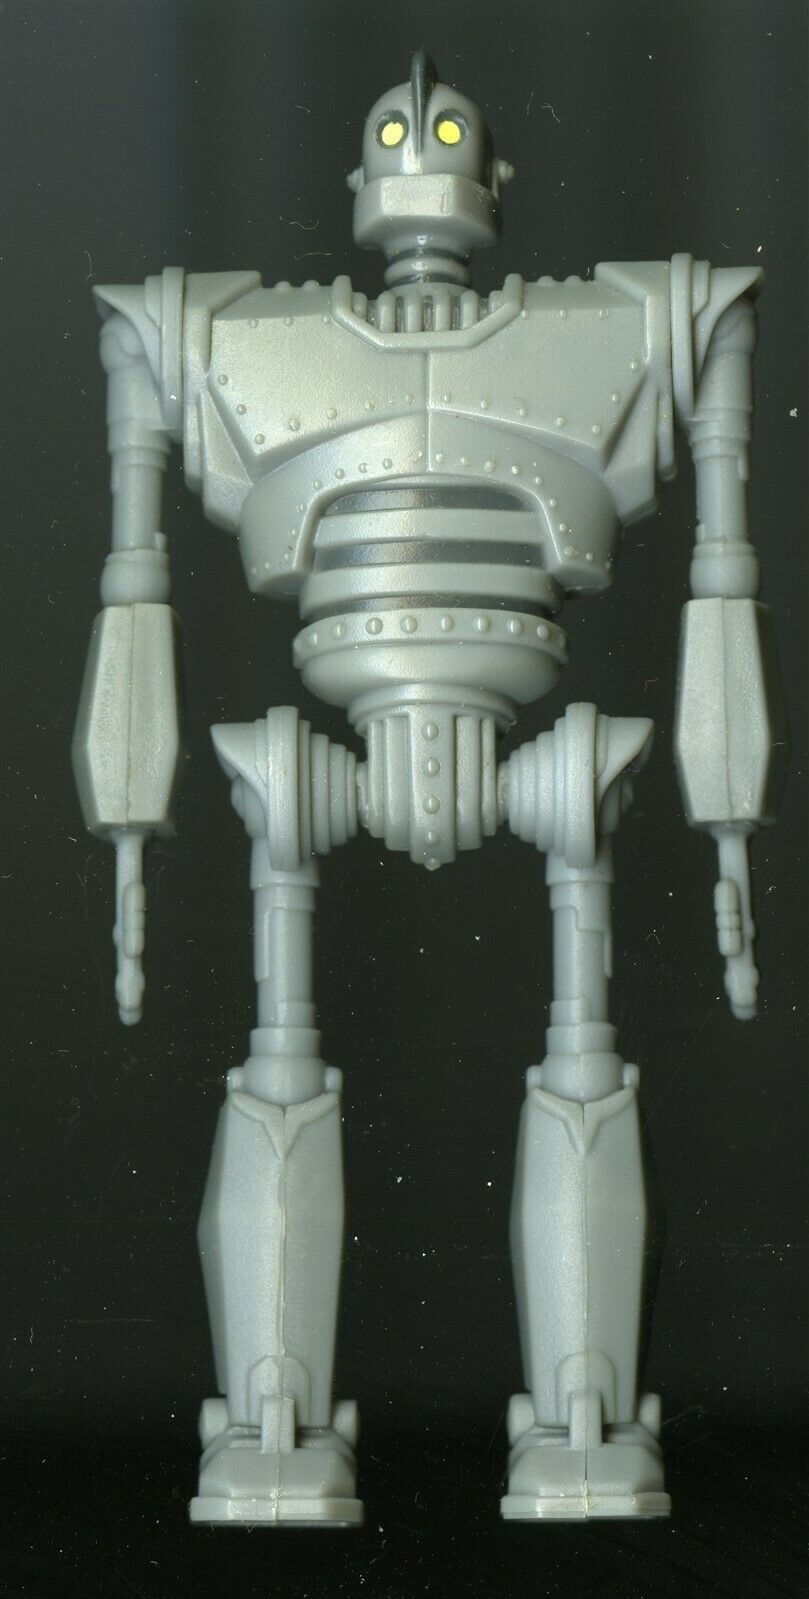 VINTAGE 1999 IRON GIANT WARNER BROS MOVIE PROMO ACTION FIGURE 4.25 INCHES - $19.95